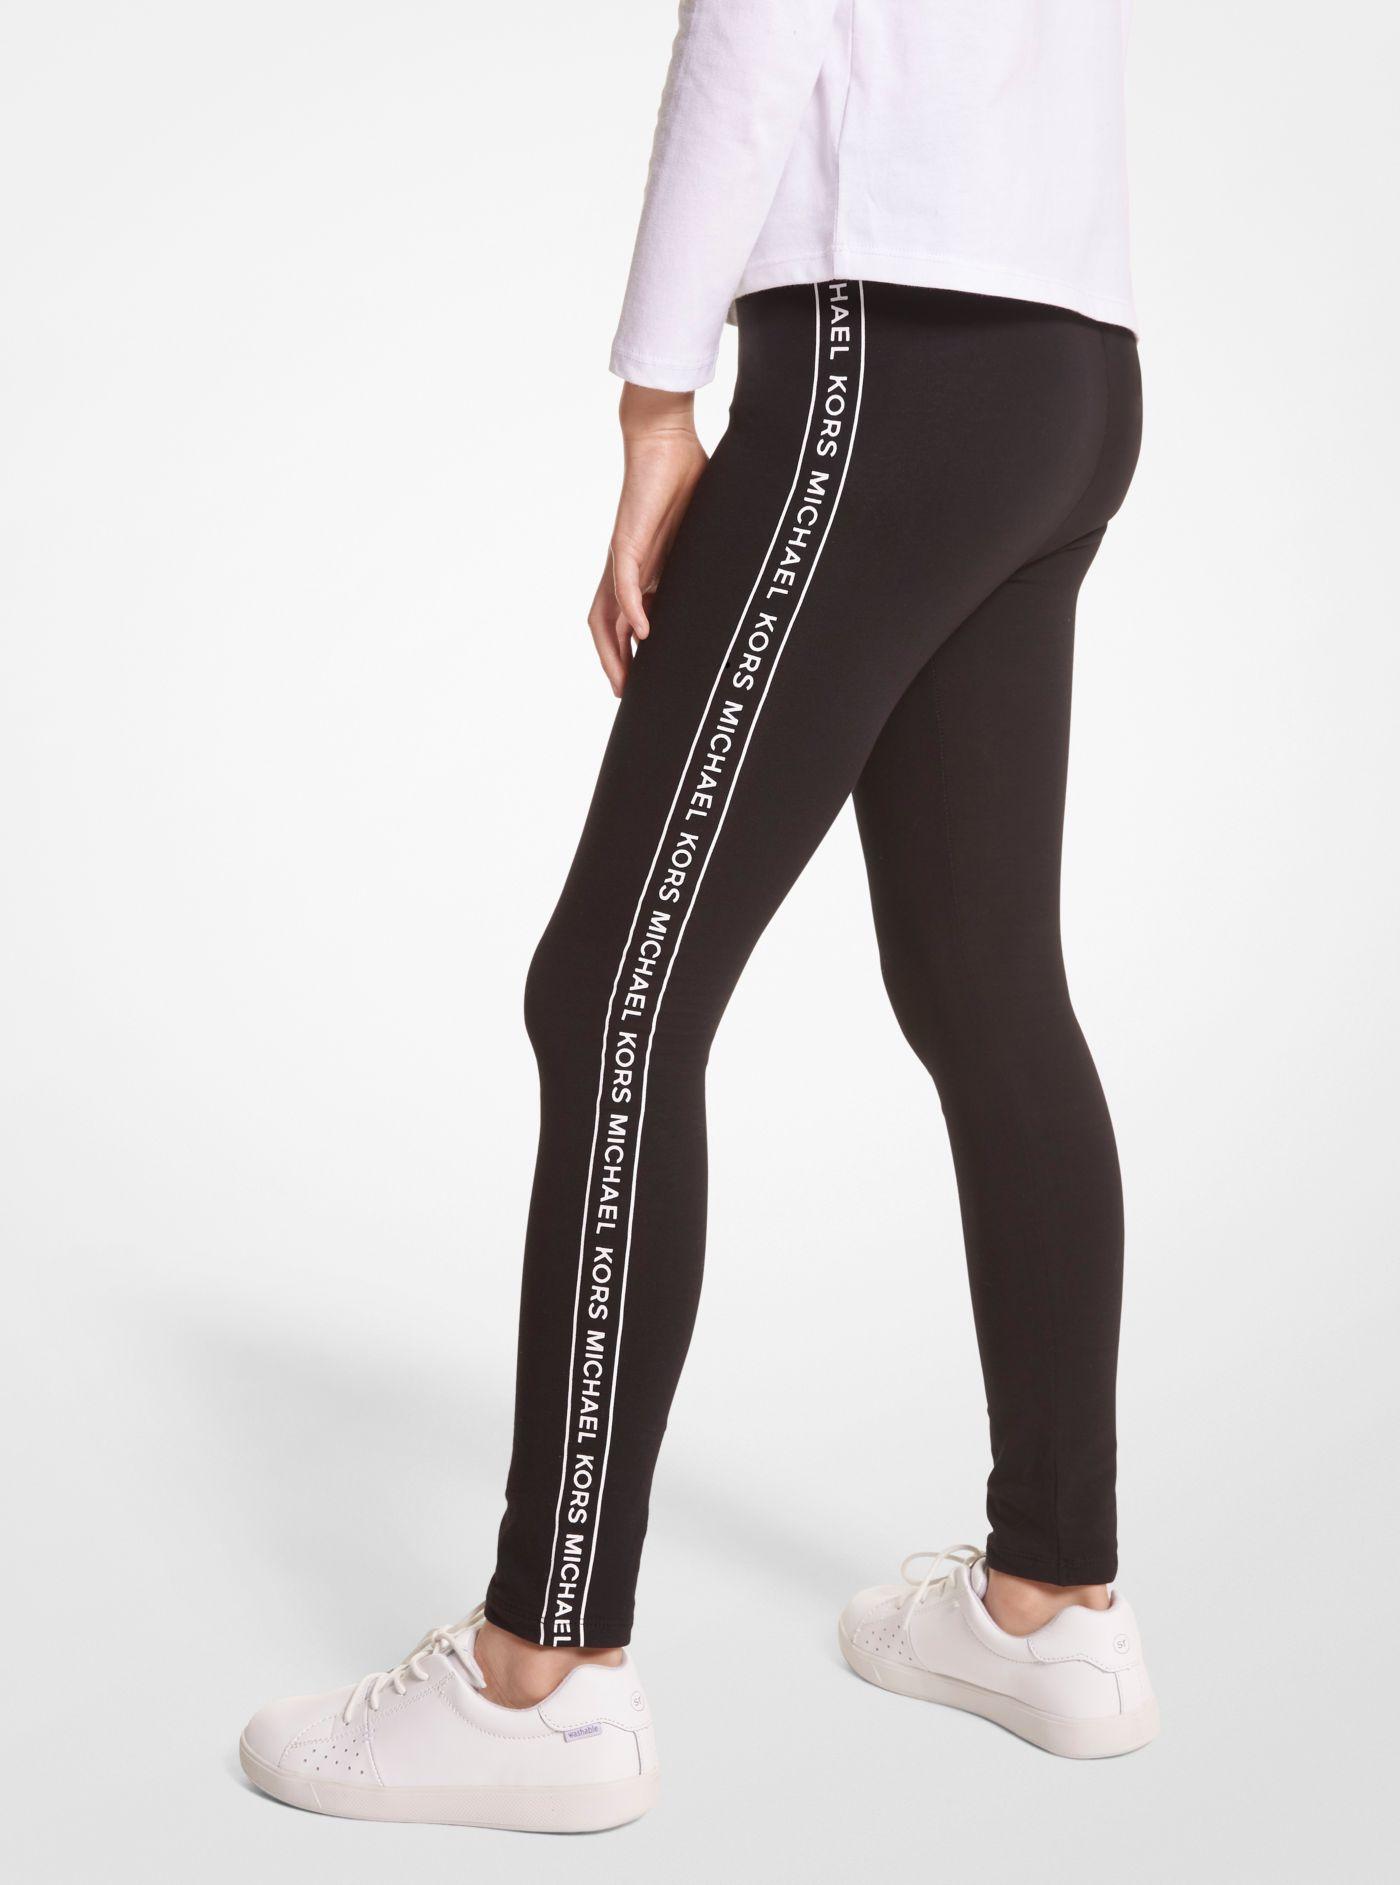 Michael Kors Leggings You Can Even Wear to the Office 25 Off